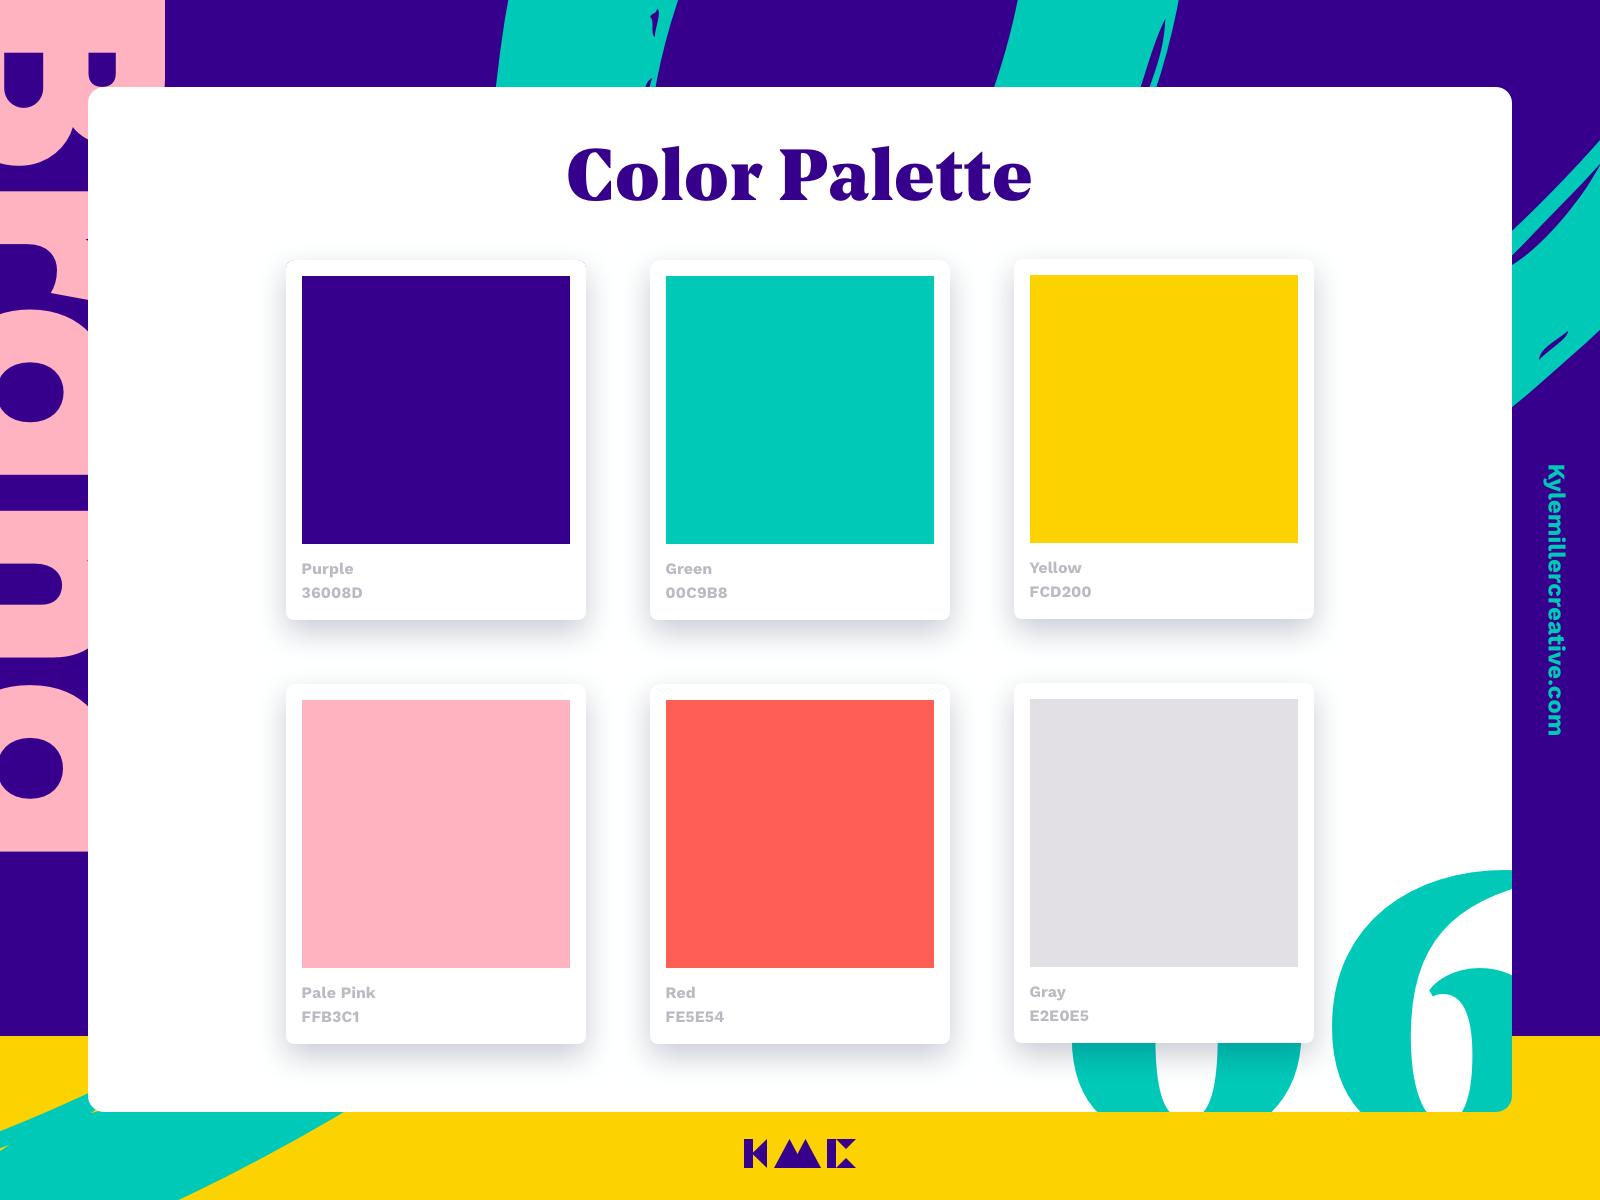 Color Palette 06 by Kyle Anthony Miller on Dribbble